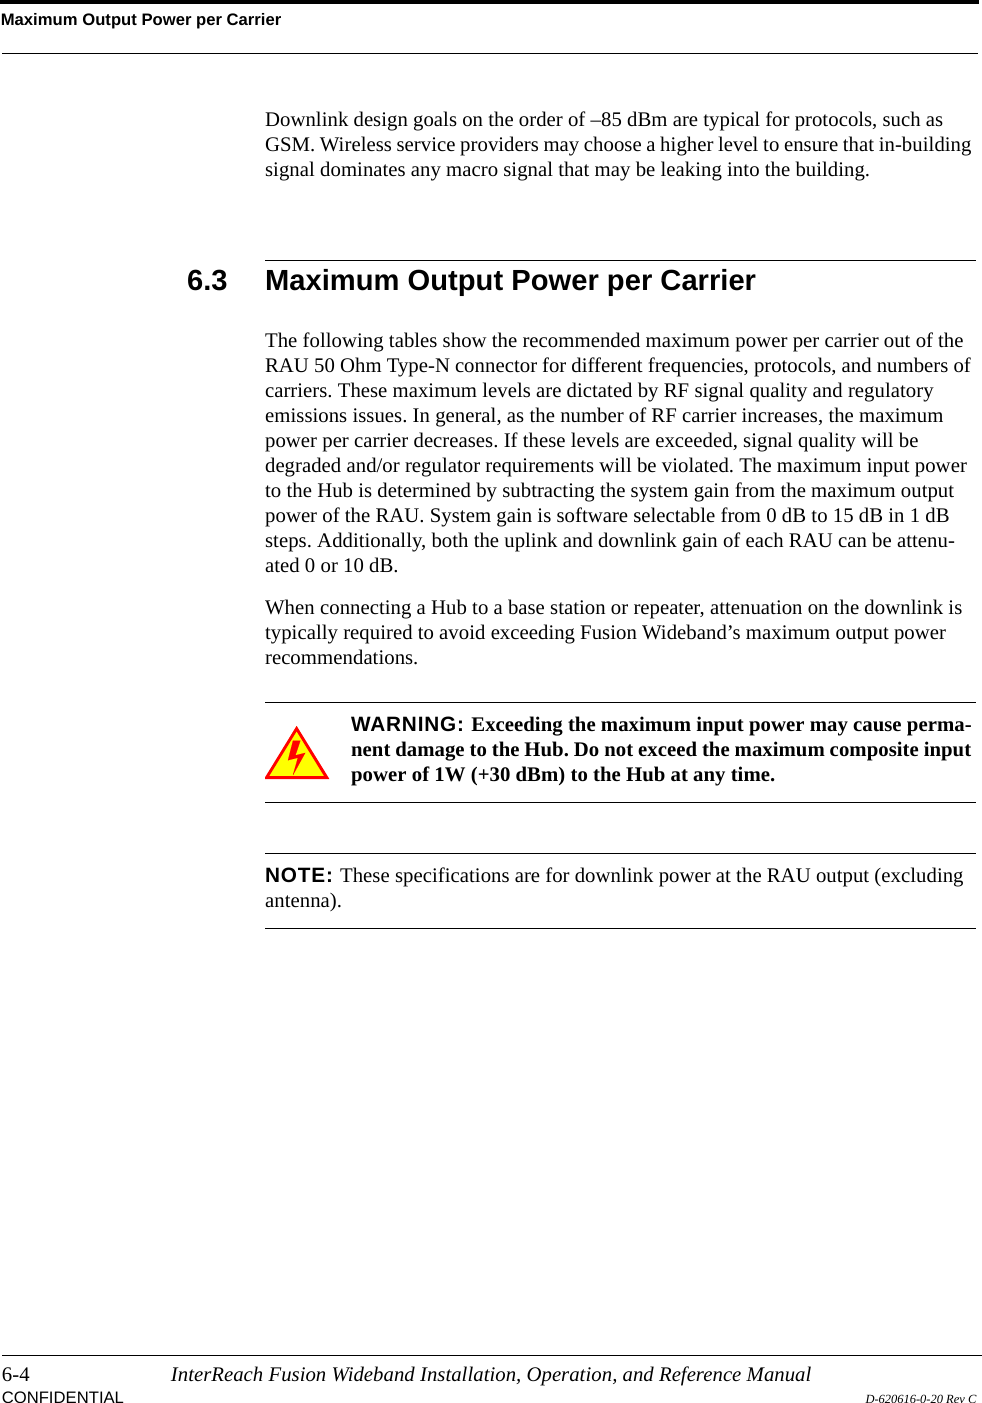 Maximum Output Power per Carrier6-4 InterReach Fusion Wideband Installation, Operation, and Reference ManualCONFIDENTIAL D-620616-0-20 Rev CDownlink design goals on the order of –85 dBm are typical for protocols, such as GSM. Wireless service providers may choose a higher level to ensure that in-building signal dominates any macro signal that may be leaking into the building.6.3 Maximum Output Power per CarrierThe following tables show the recommended maximum power per carrier out of the RAU 50 Ohm Type-N connector for different frequencies, protocols, and numbers of carriers. These maximum levels are dictated by RF signal quality and regulatory emissions issues. In general, as the number of RF carrier increases, the maximum power per carrier decreases. If these levels are exceeded, signal quality will be degraded and/or regulator requirements will be violated. The maximum input power to the Hub is determined by subtracting the system gain from the maximum output power of the RAU. System gain is software selectable from 0 dB to 15 dB in 1 dB steps. Additionally, both the uplink and downlink gain of each RAU can be attenu-ated 0 or 10 dB.When connecting a Hub to a base station or repeater, attenuation on the downlink is typically required to avoid exceeding Fusion Wideband’s maximum output power recommendations.WARNING: Exceeding the maximum input power may cause perma-nent damage to the Hub. Do not exceed the maximum composite input power of 1W (+30 dBm) to the Hub at any time.NOTE: These specifications are for downlink power at the RAU output (excluding antenna).